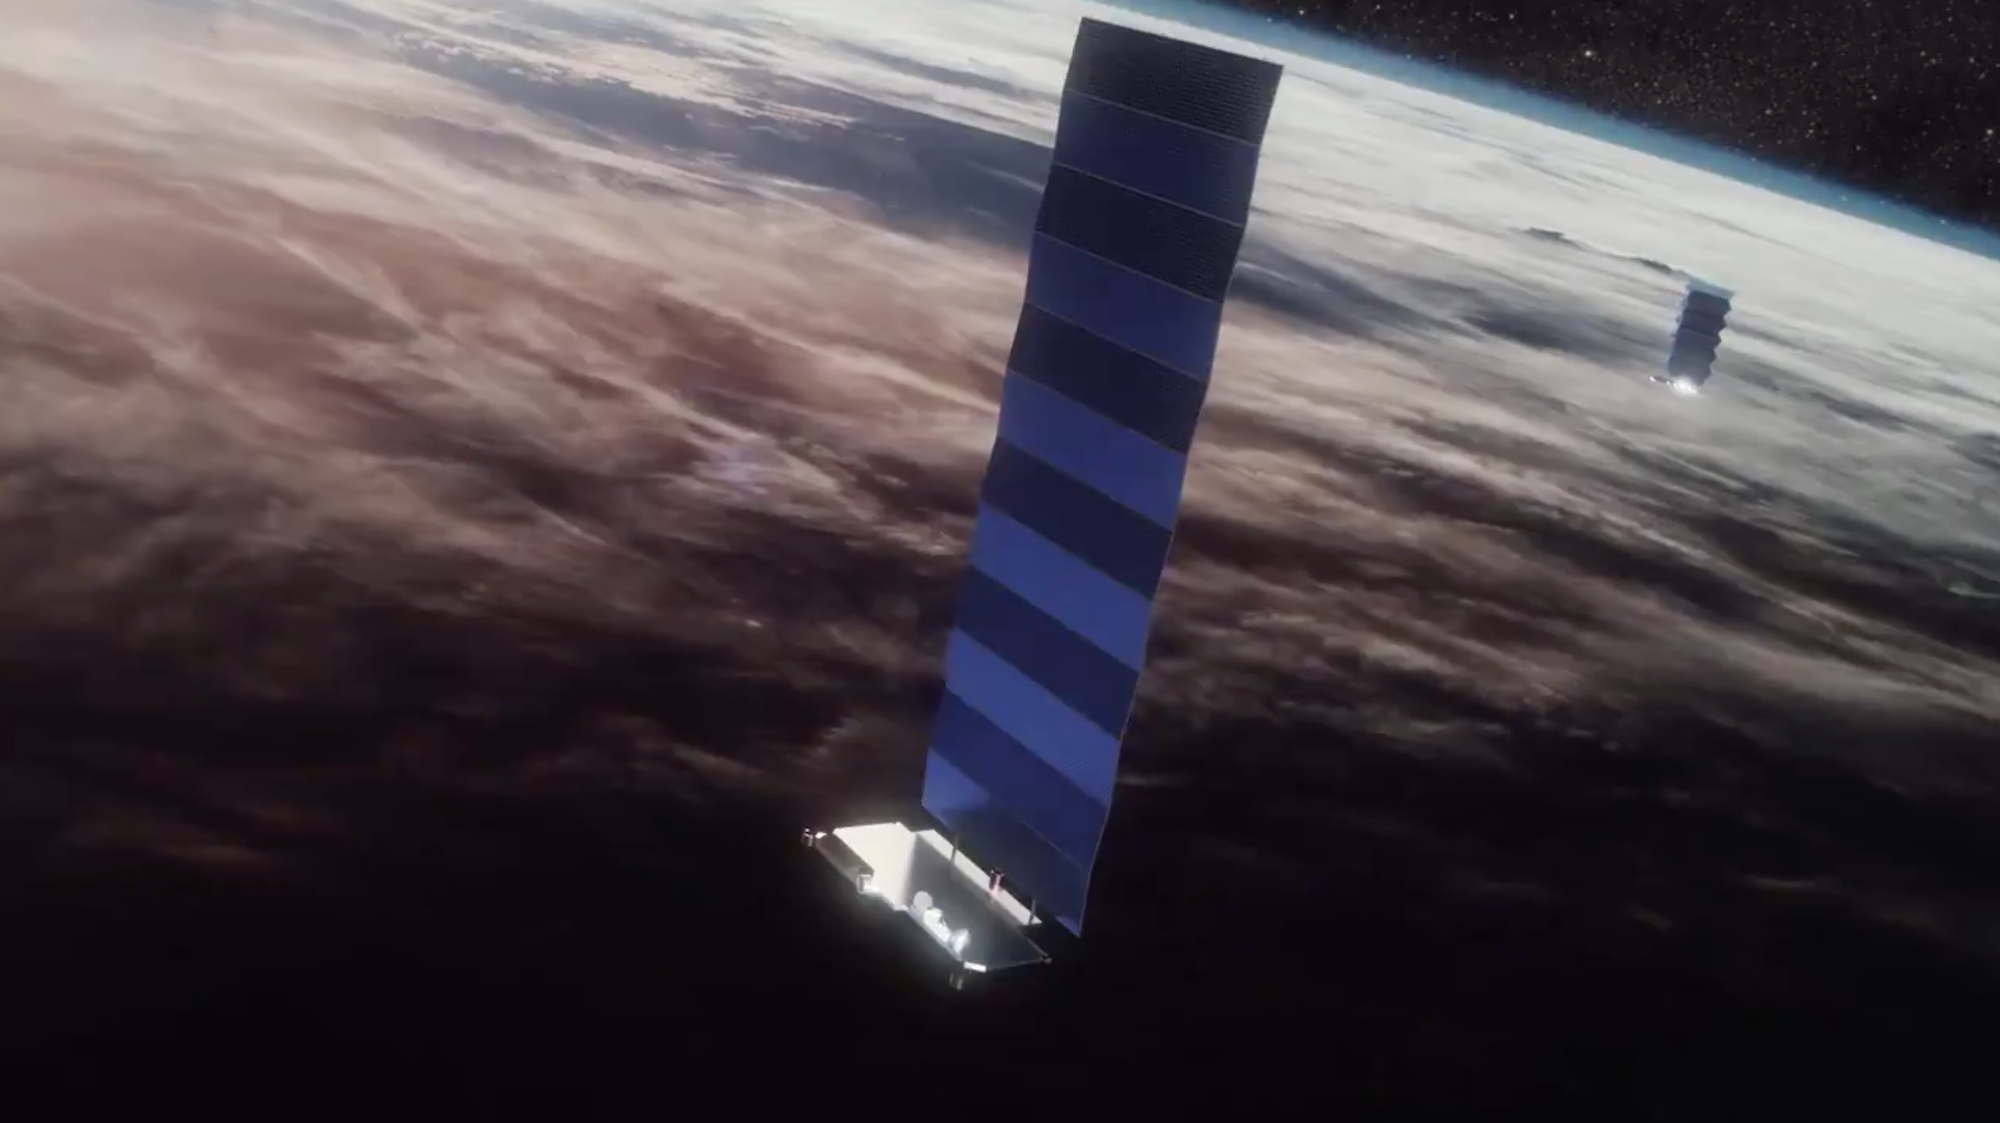 SpaceX wins space development agency contracts to build L3 Harris missile-warning satellites